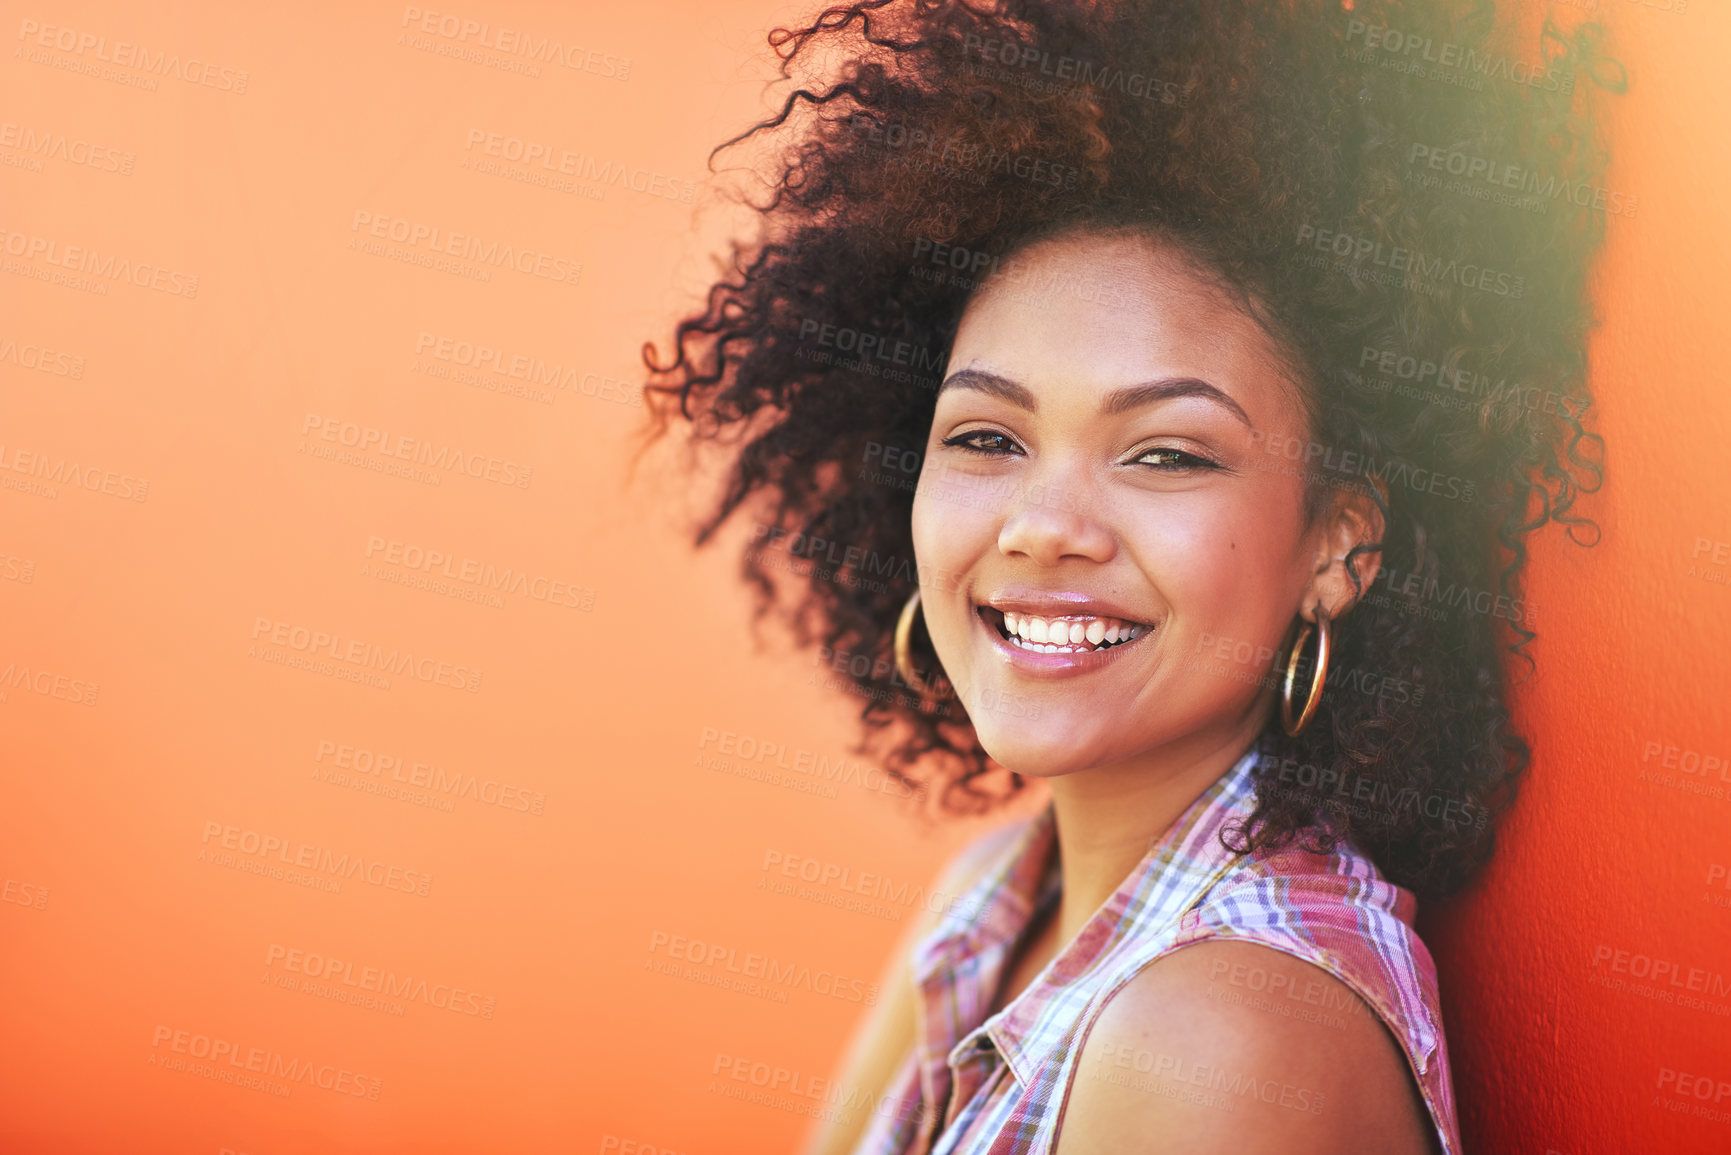 Buy stock photo Shot of an attractive young woman posing against a colorful background